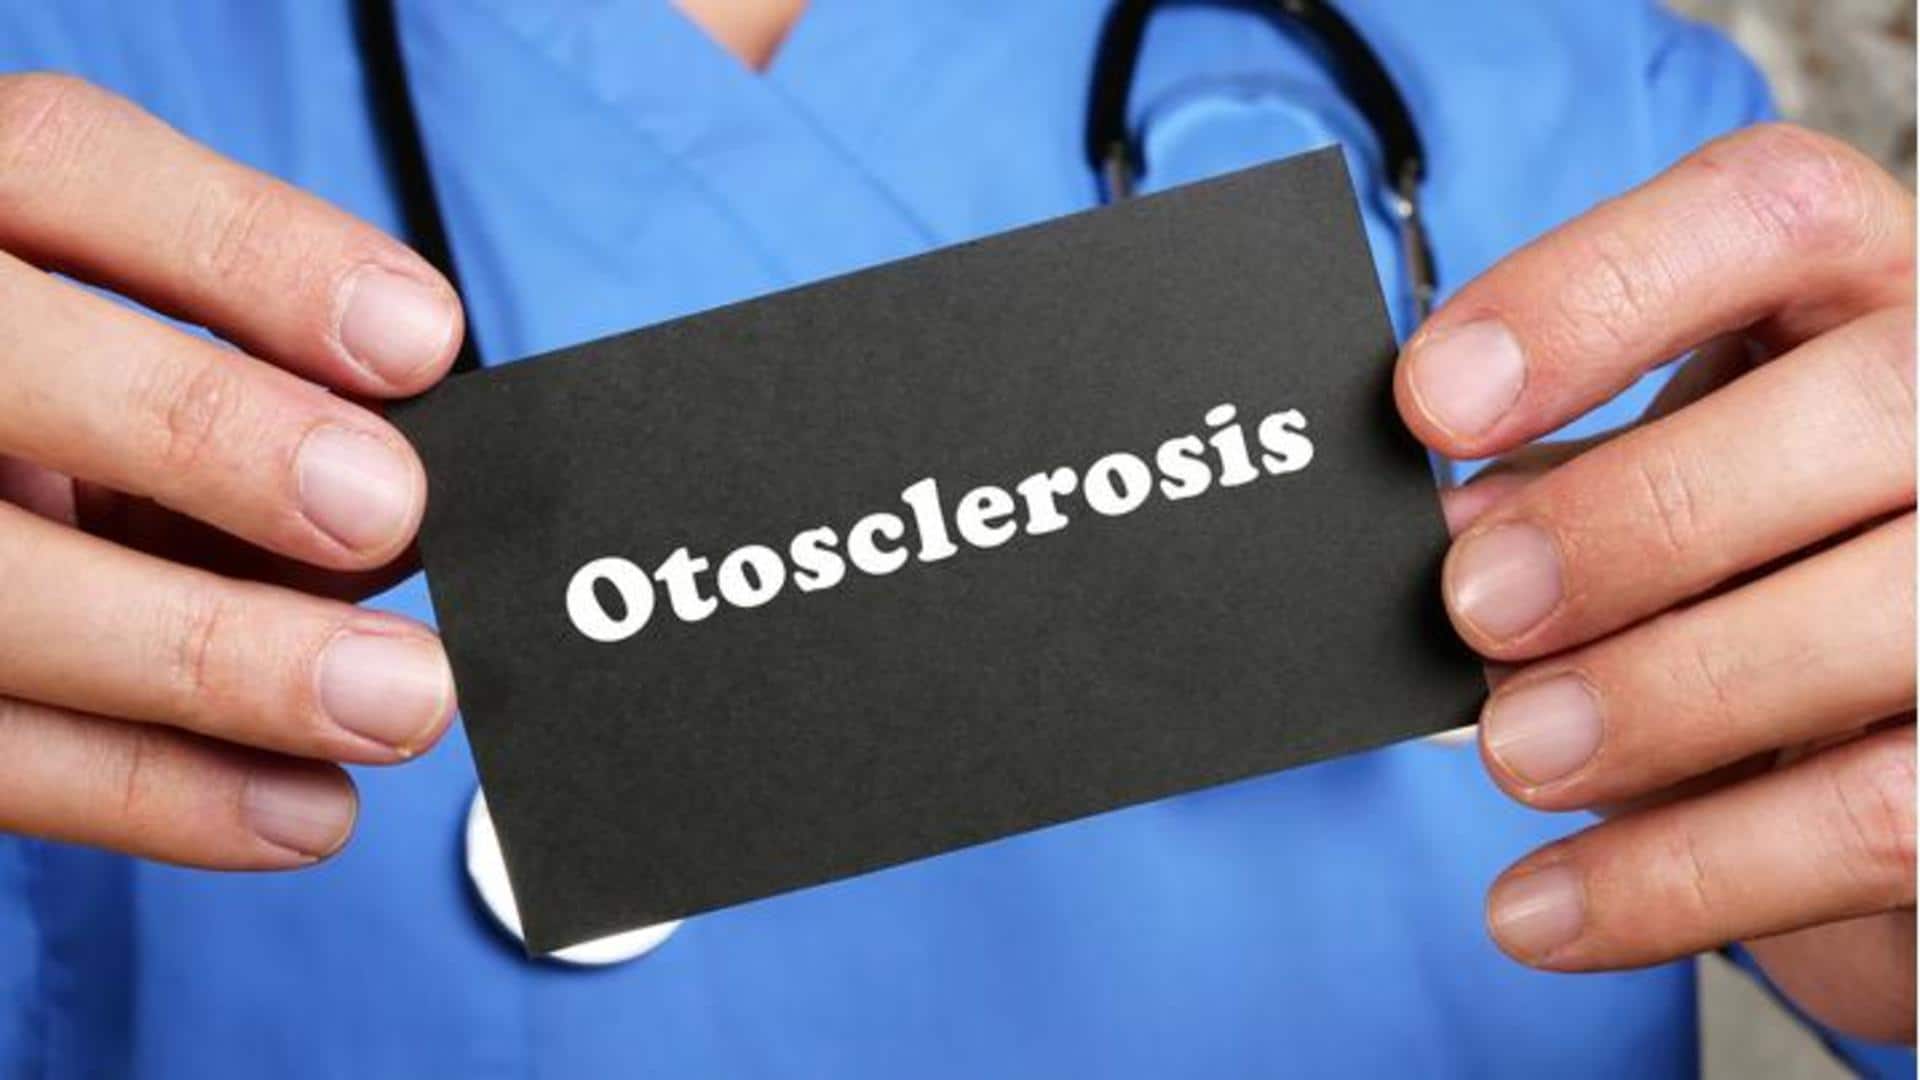 All about otosclerosis: Causes, symptoms, and treatment